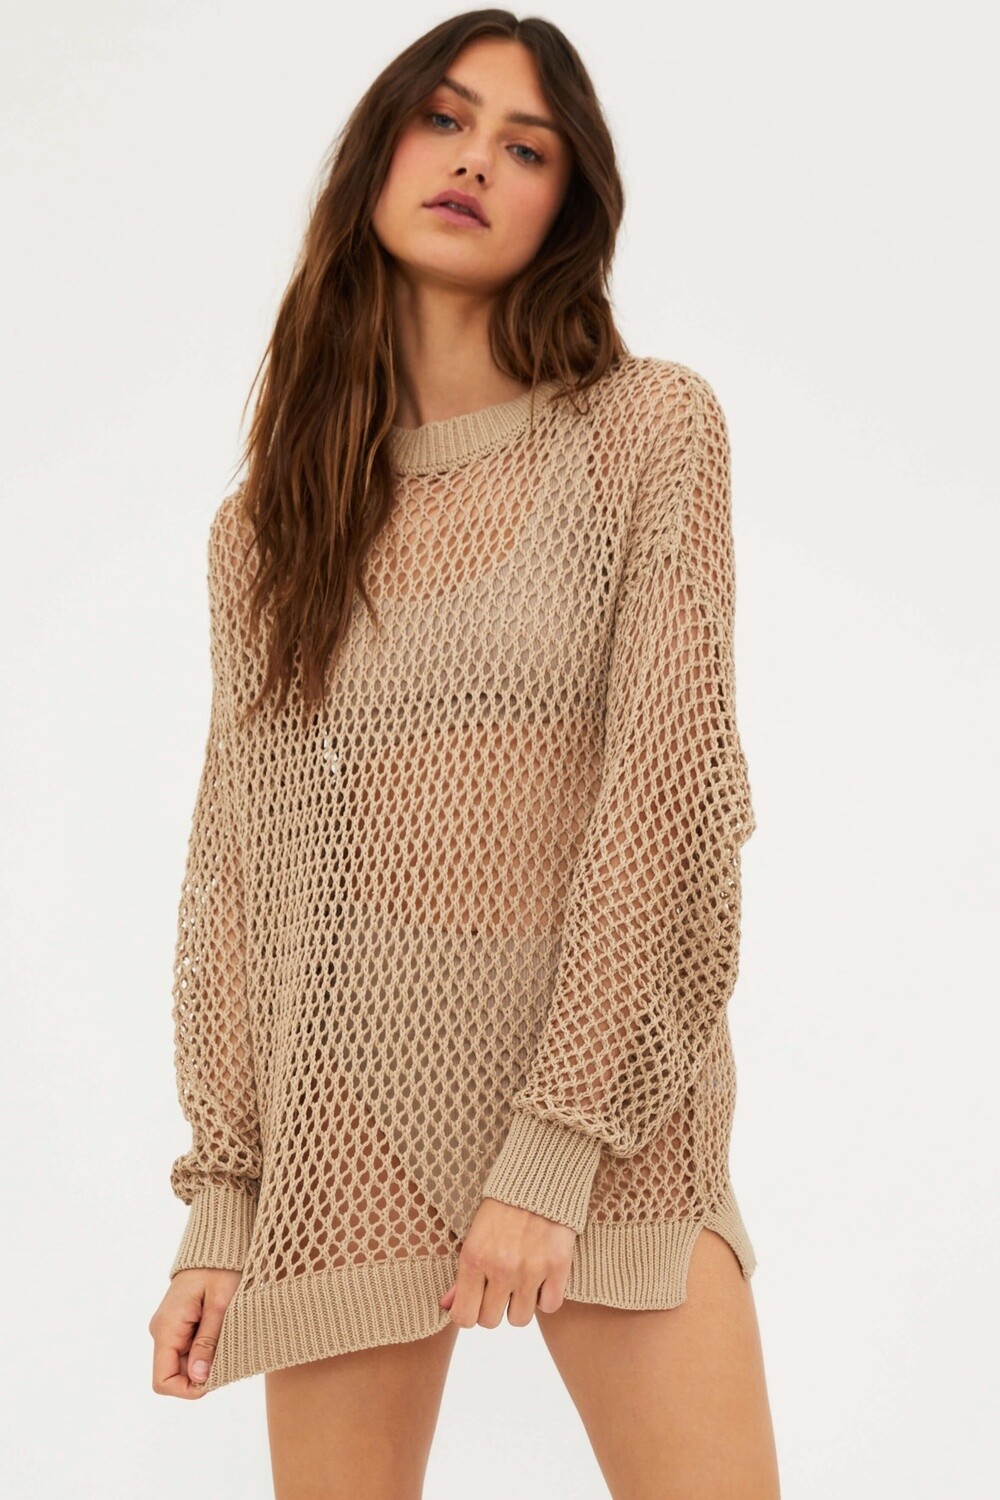 Hilary Sweater, Color: Tan, Size: Xs